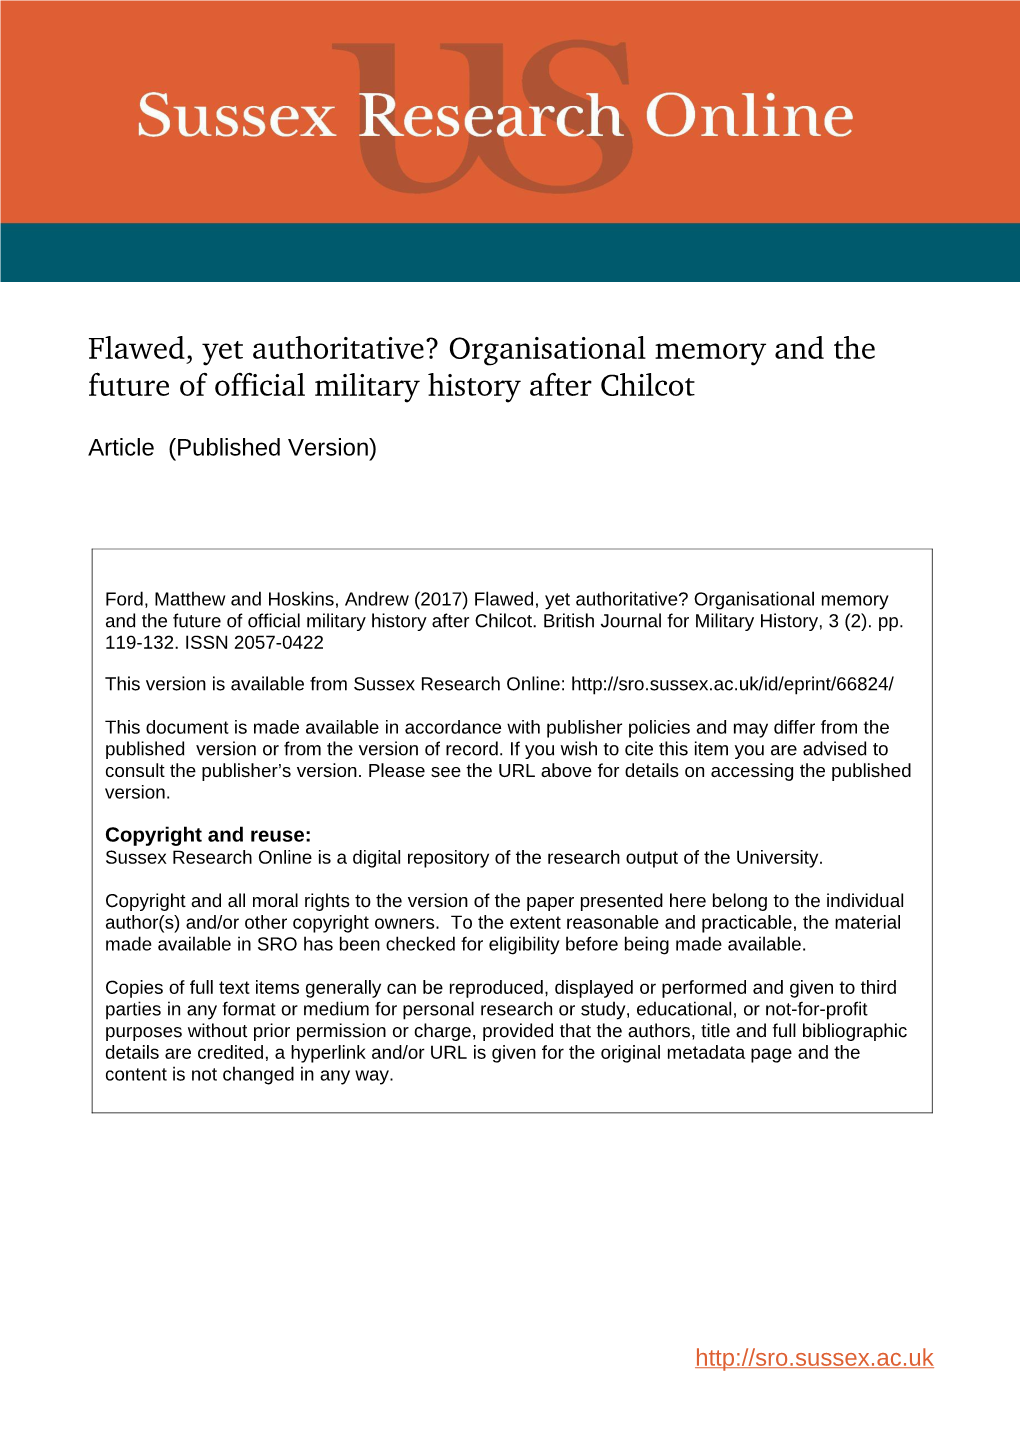 Organisational Memory and the Future of Official Military History After Chilcot